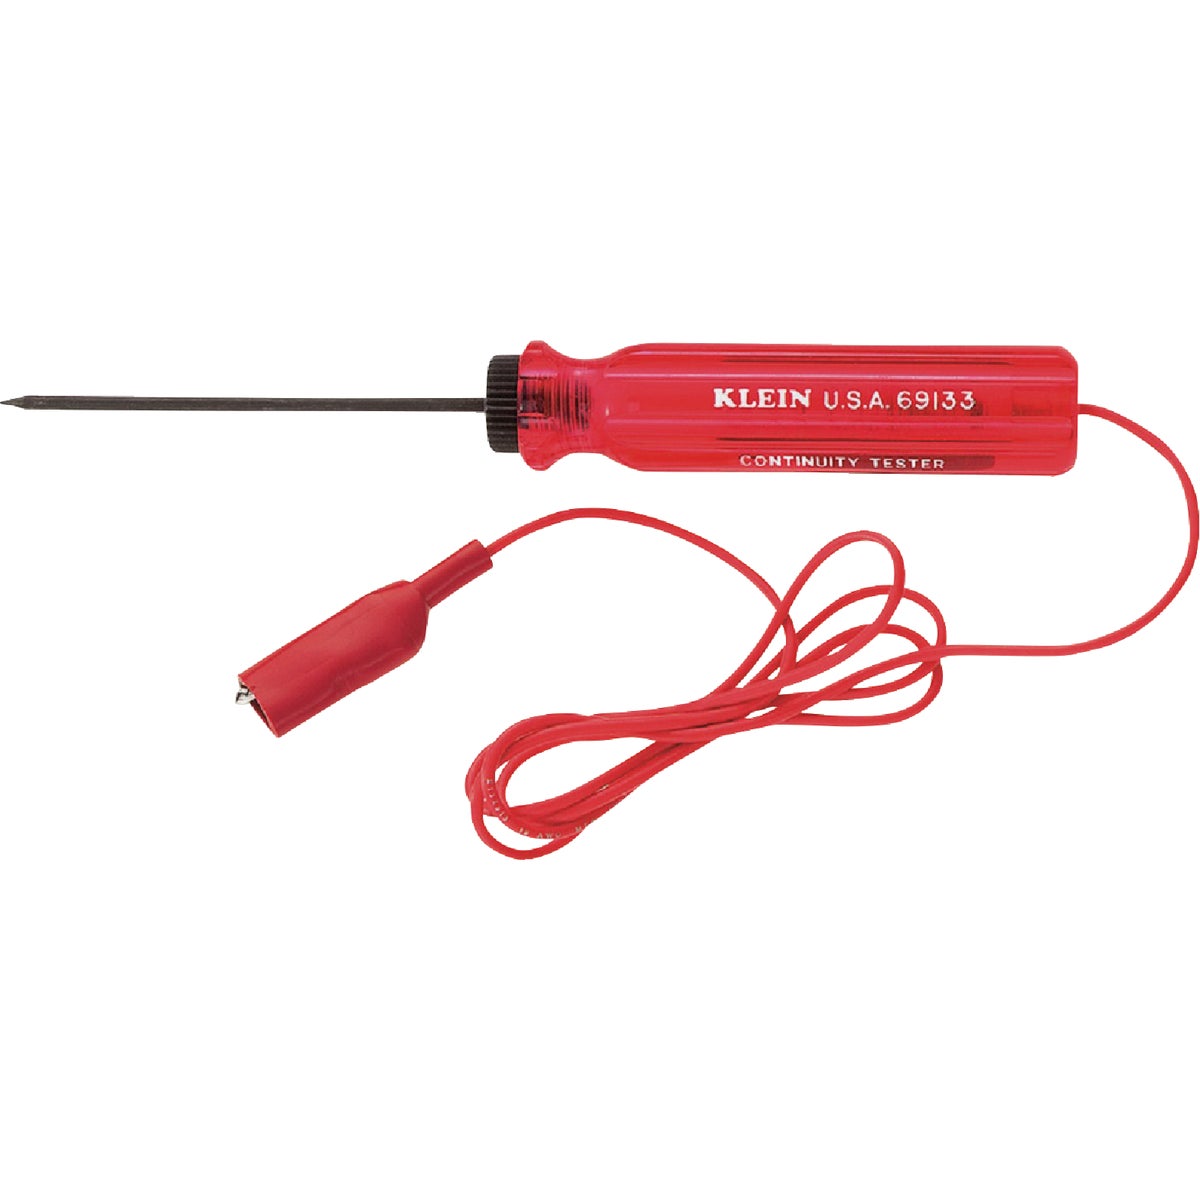 Klein 36 In. Continuity Tester